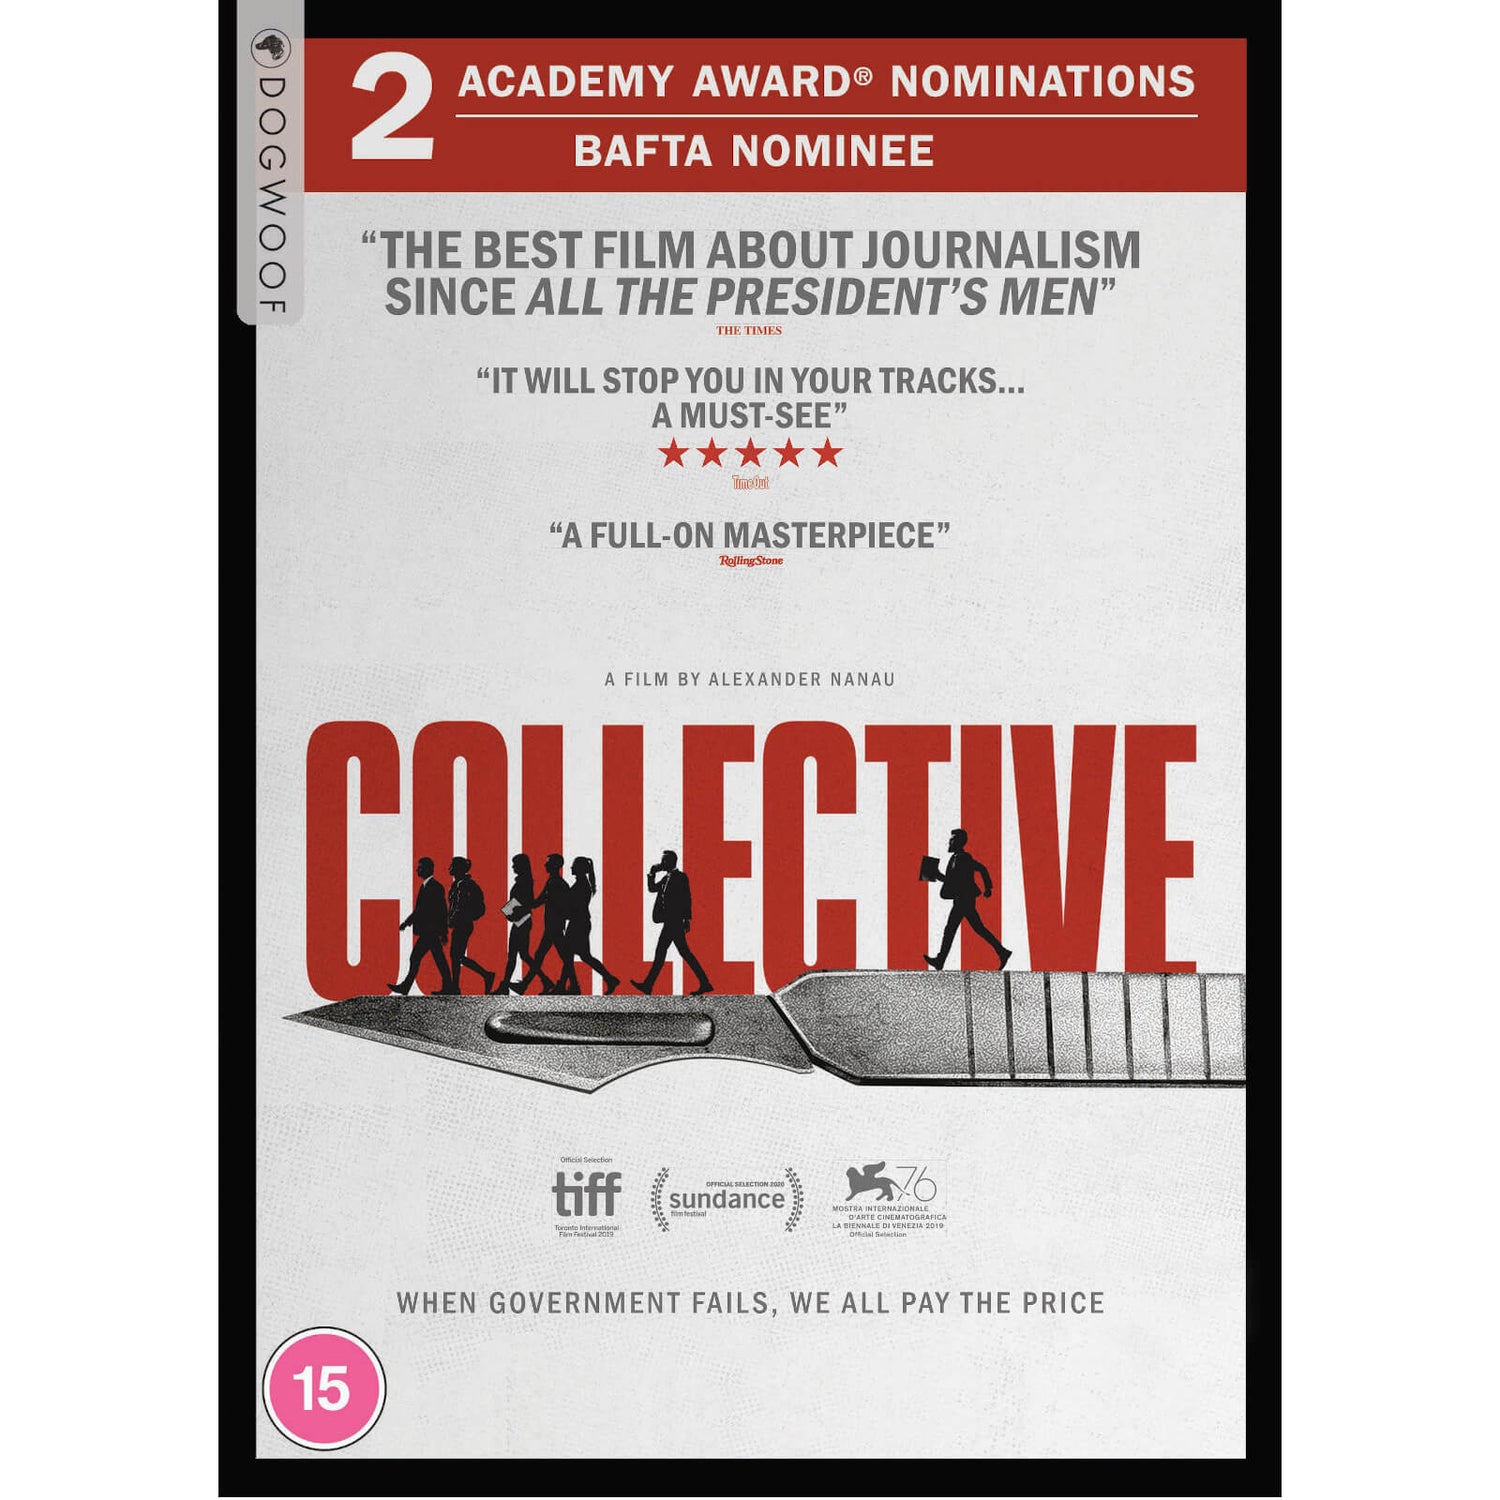 Collectief